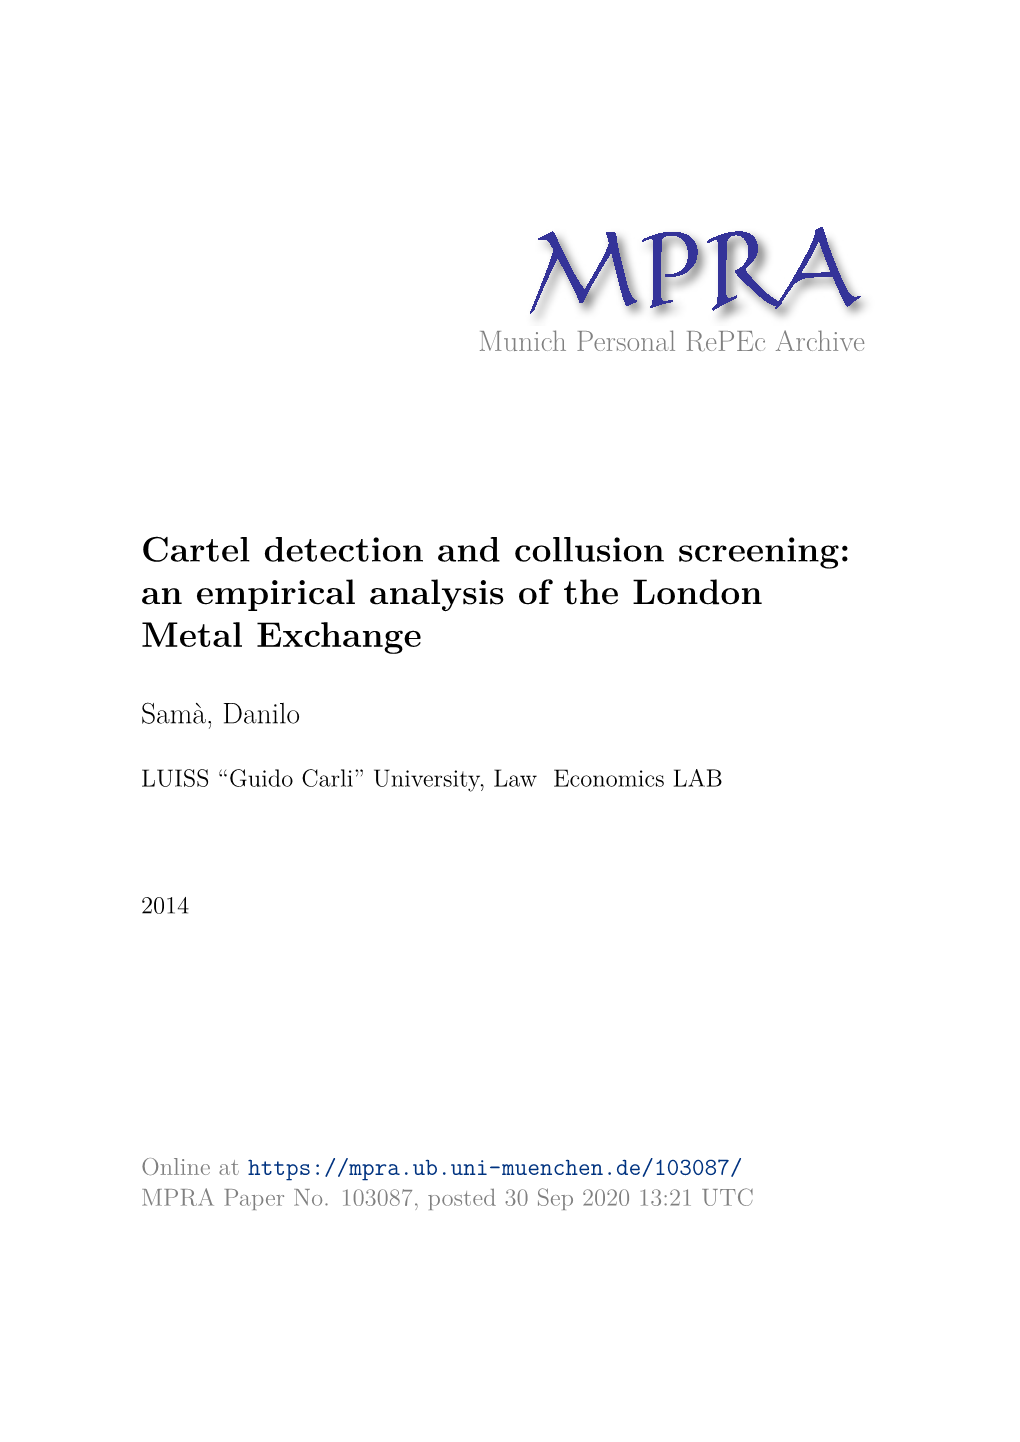 Cartel Detection and Collusion Screening: an Empirical Analysis of the London Metal Exchange